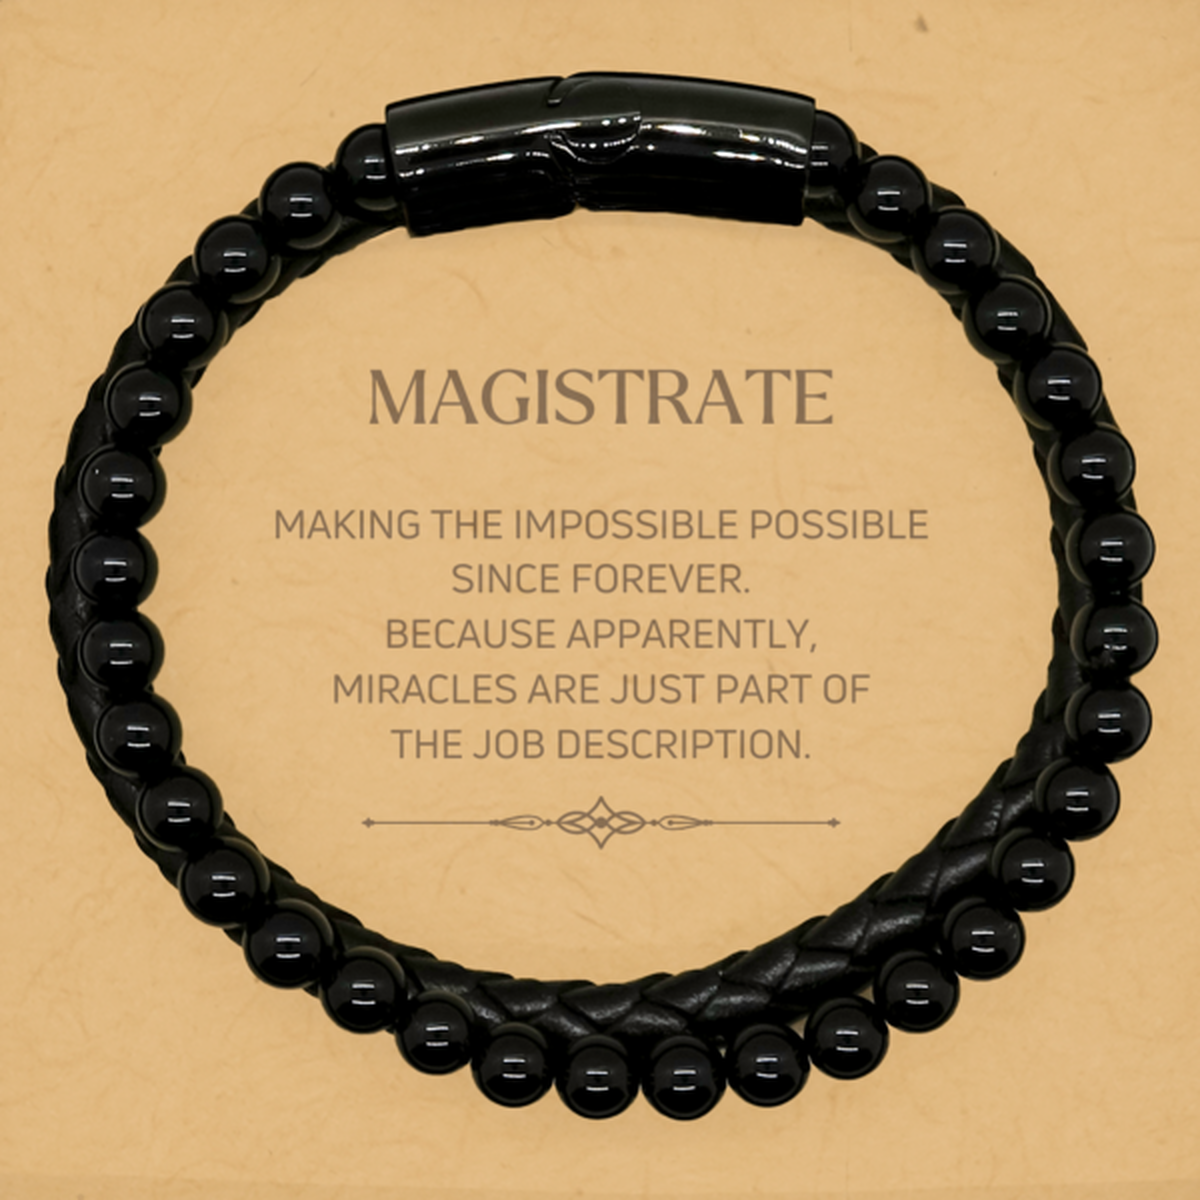 Funny Magistrate Gifts, Miracles are just part of the job description, Inspirational Birthday Stone Leather Bracelets For Magistrate, Men, Women, Coworkers, Friends, Boss